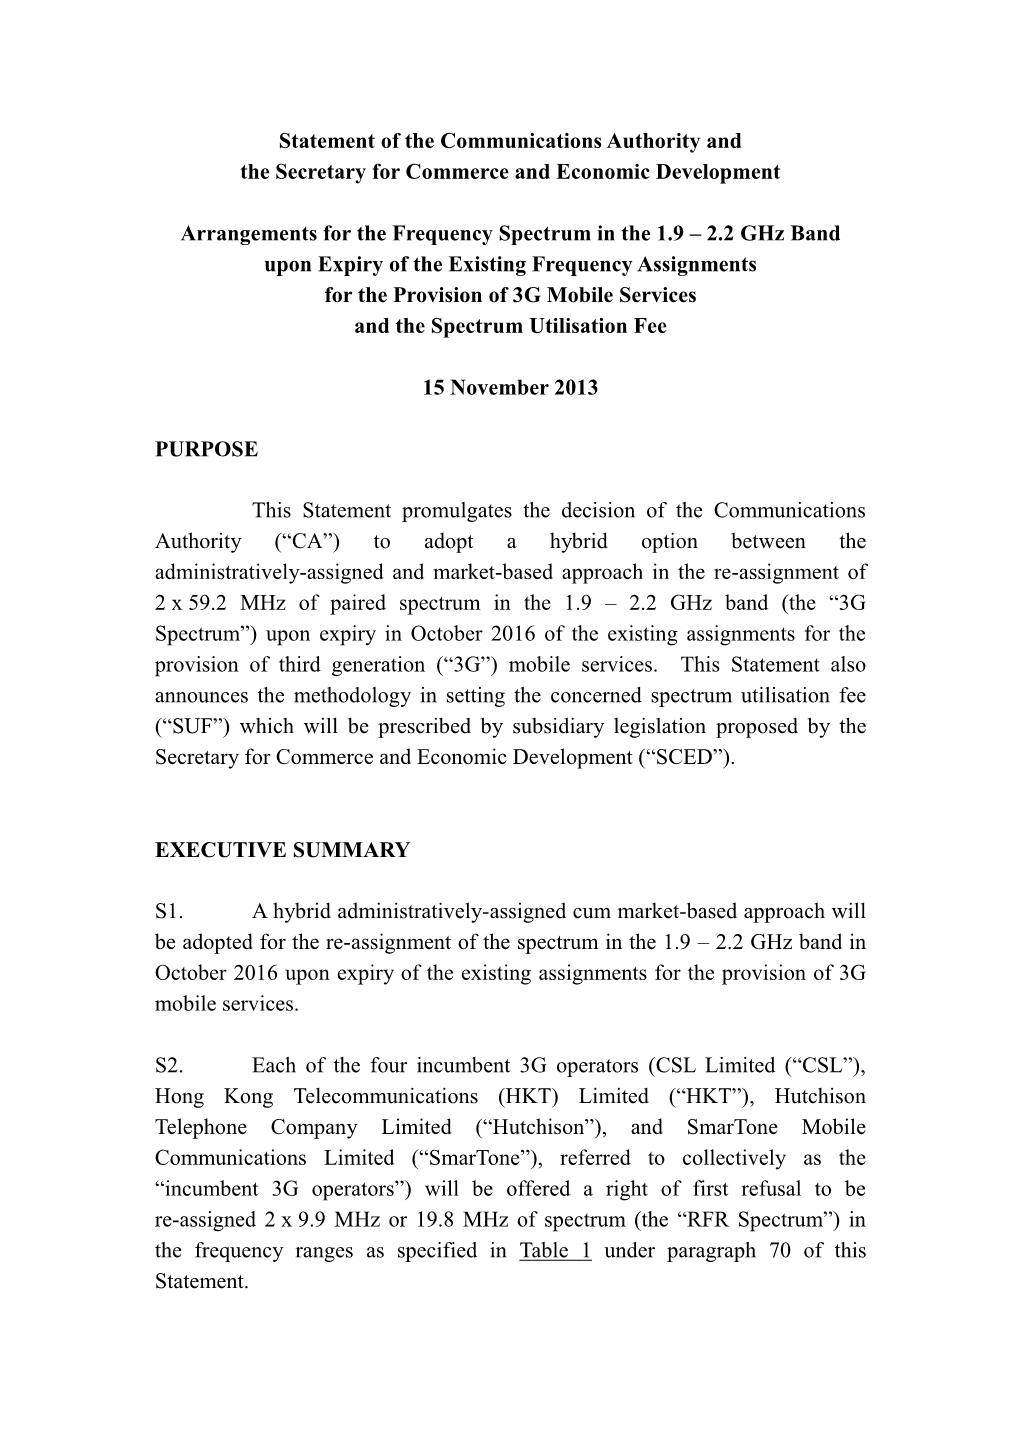 Arrangements for the Frequency Spectrum in the 1.9 – 2.2 Ghz Band Upon Expiry of the Existing